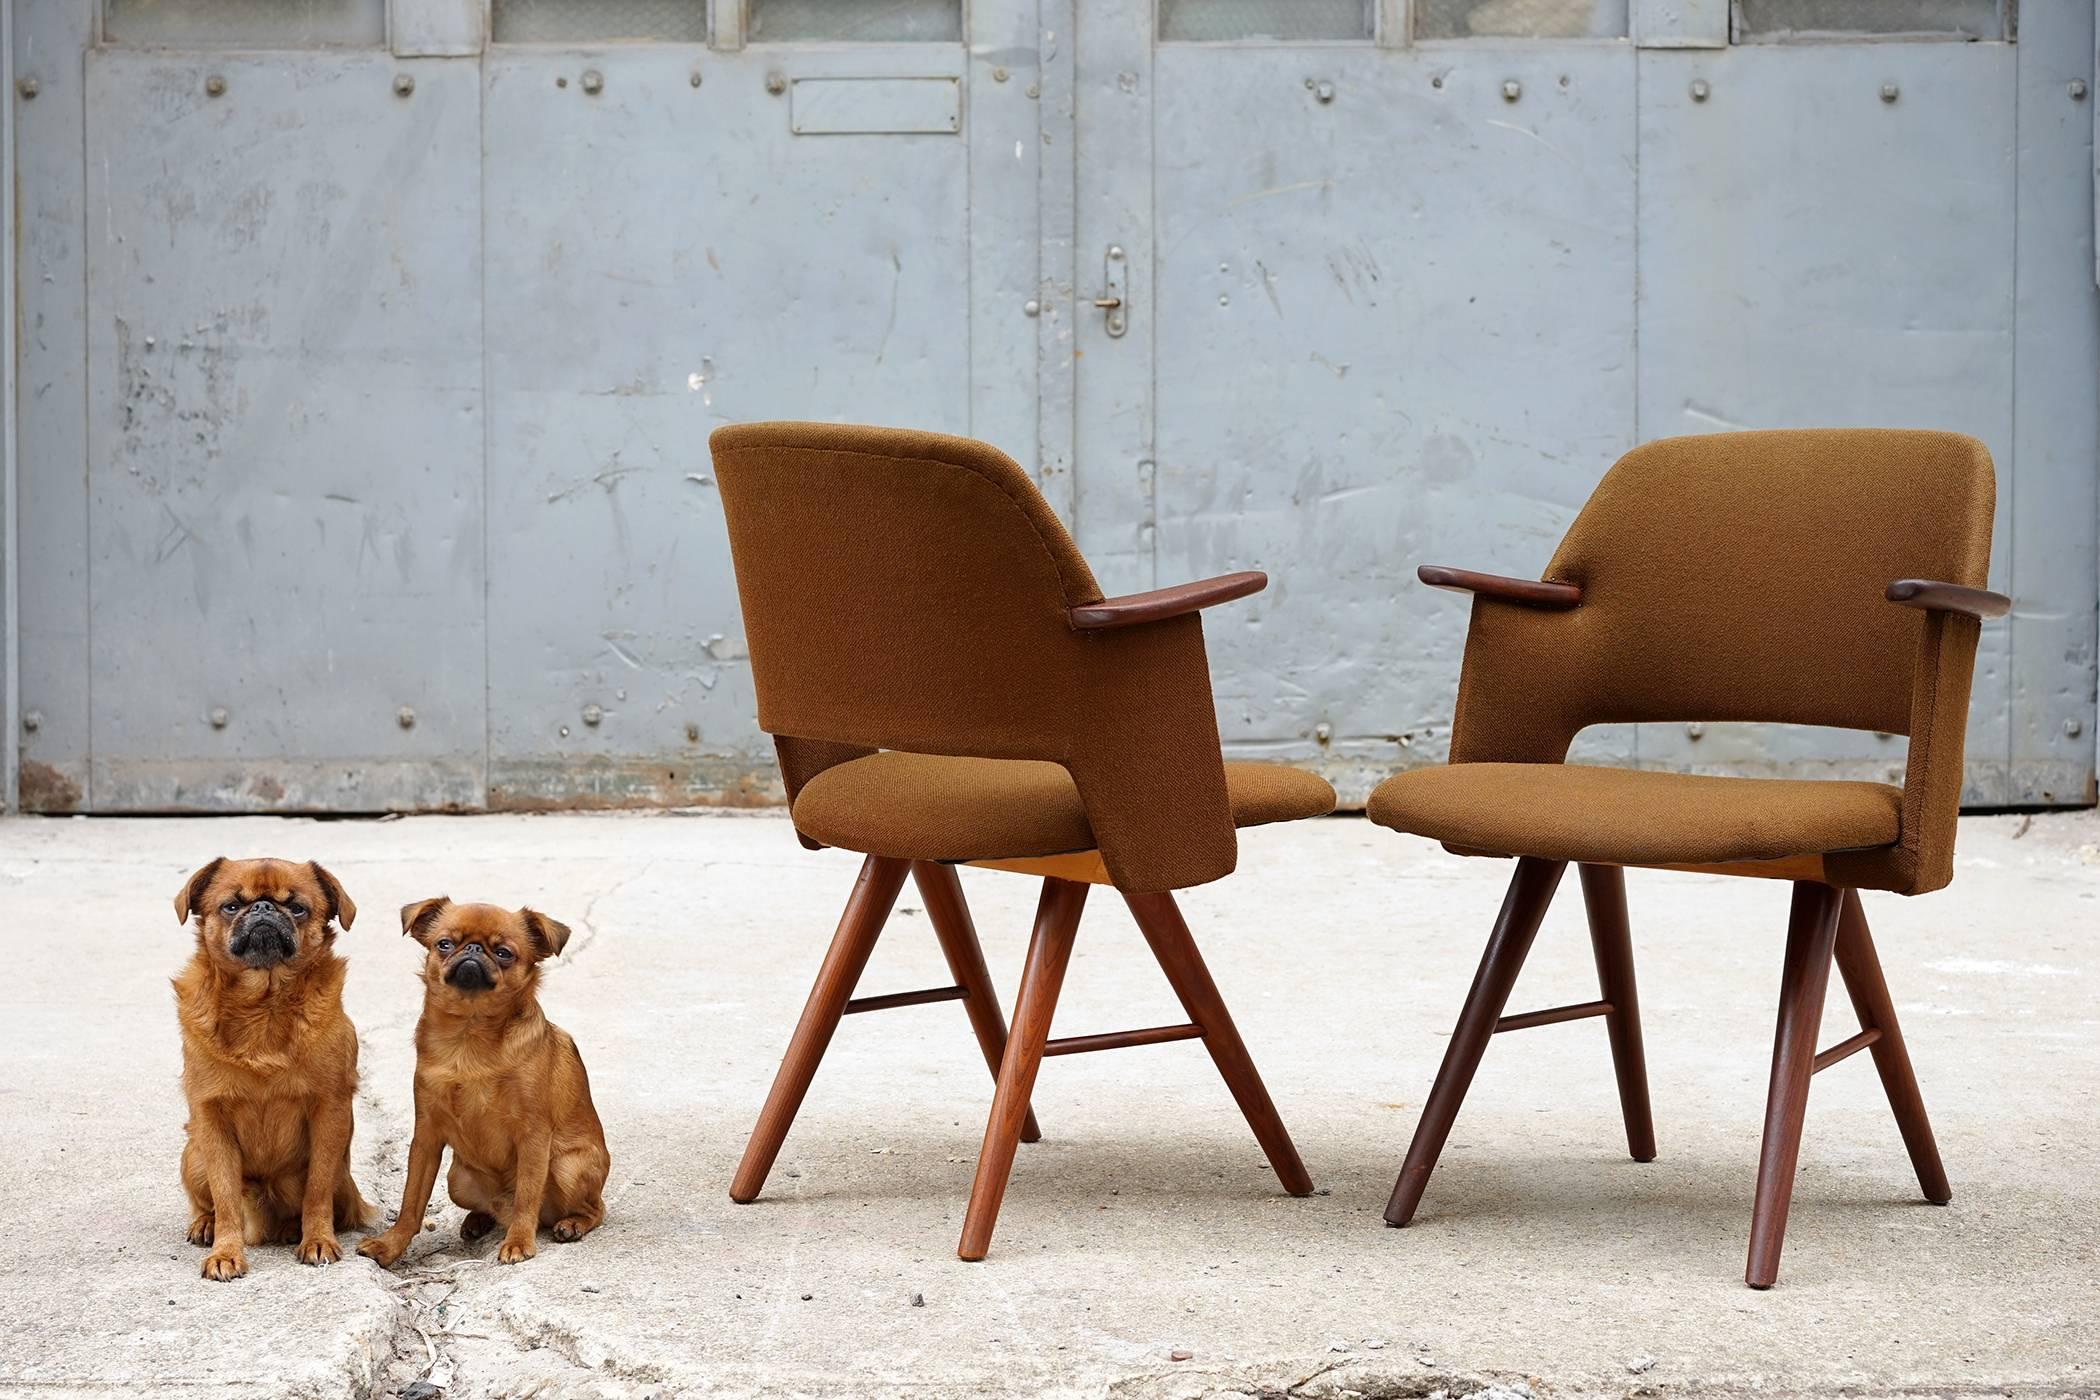 All original and in fine vintage condition. Handsome Mid-Century Modern design with scissor legs, slender components and a cantilevered seat which combine to create a light and airy Silhouette. Sturdy, comfortable and nicely detailed. Model J30,